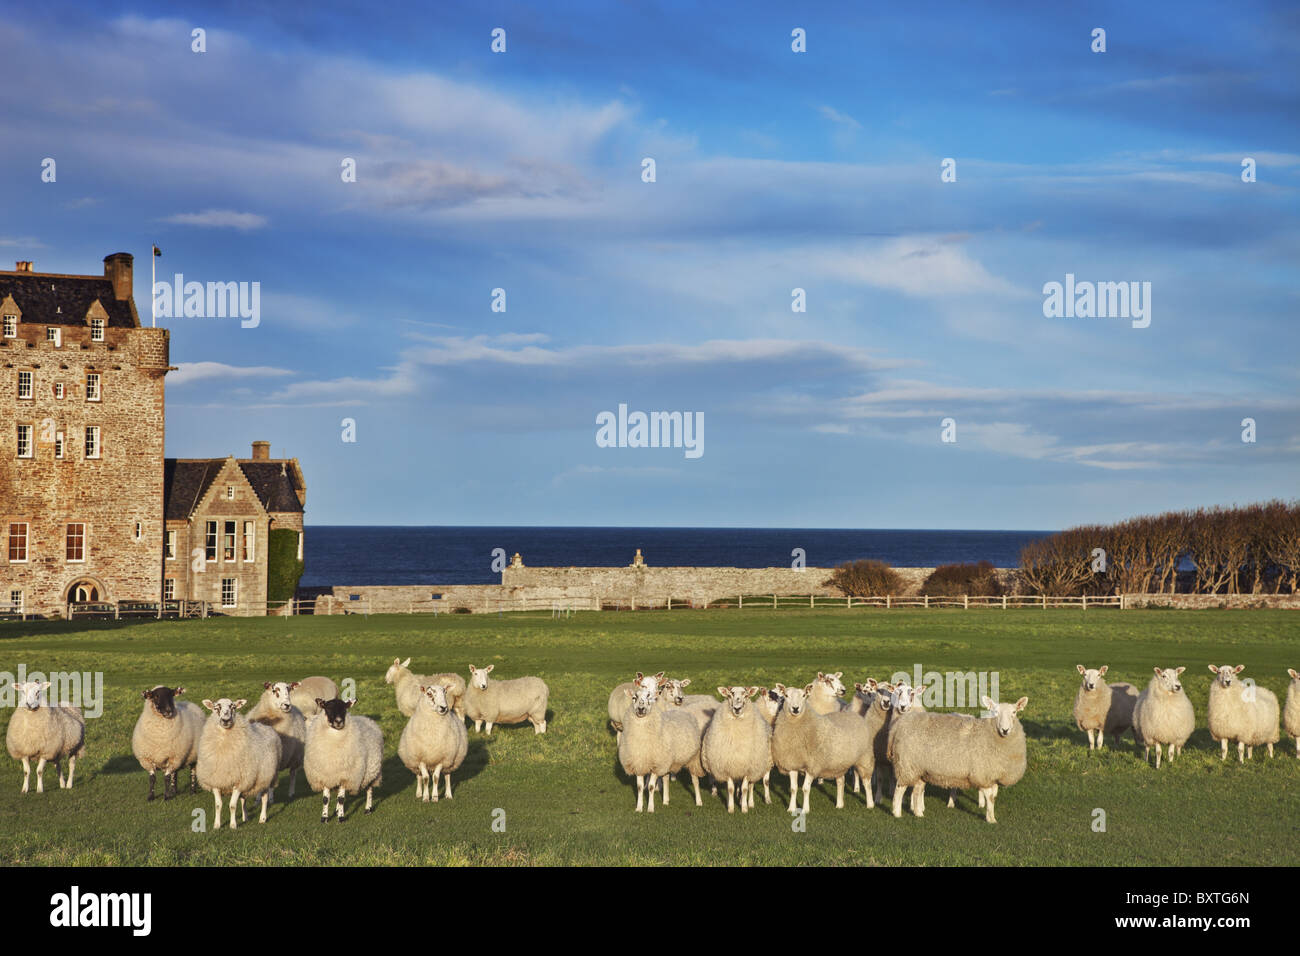 Flock of sheep dotting landscape in front of Scottish Castle. Stock Photo